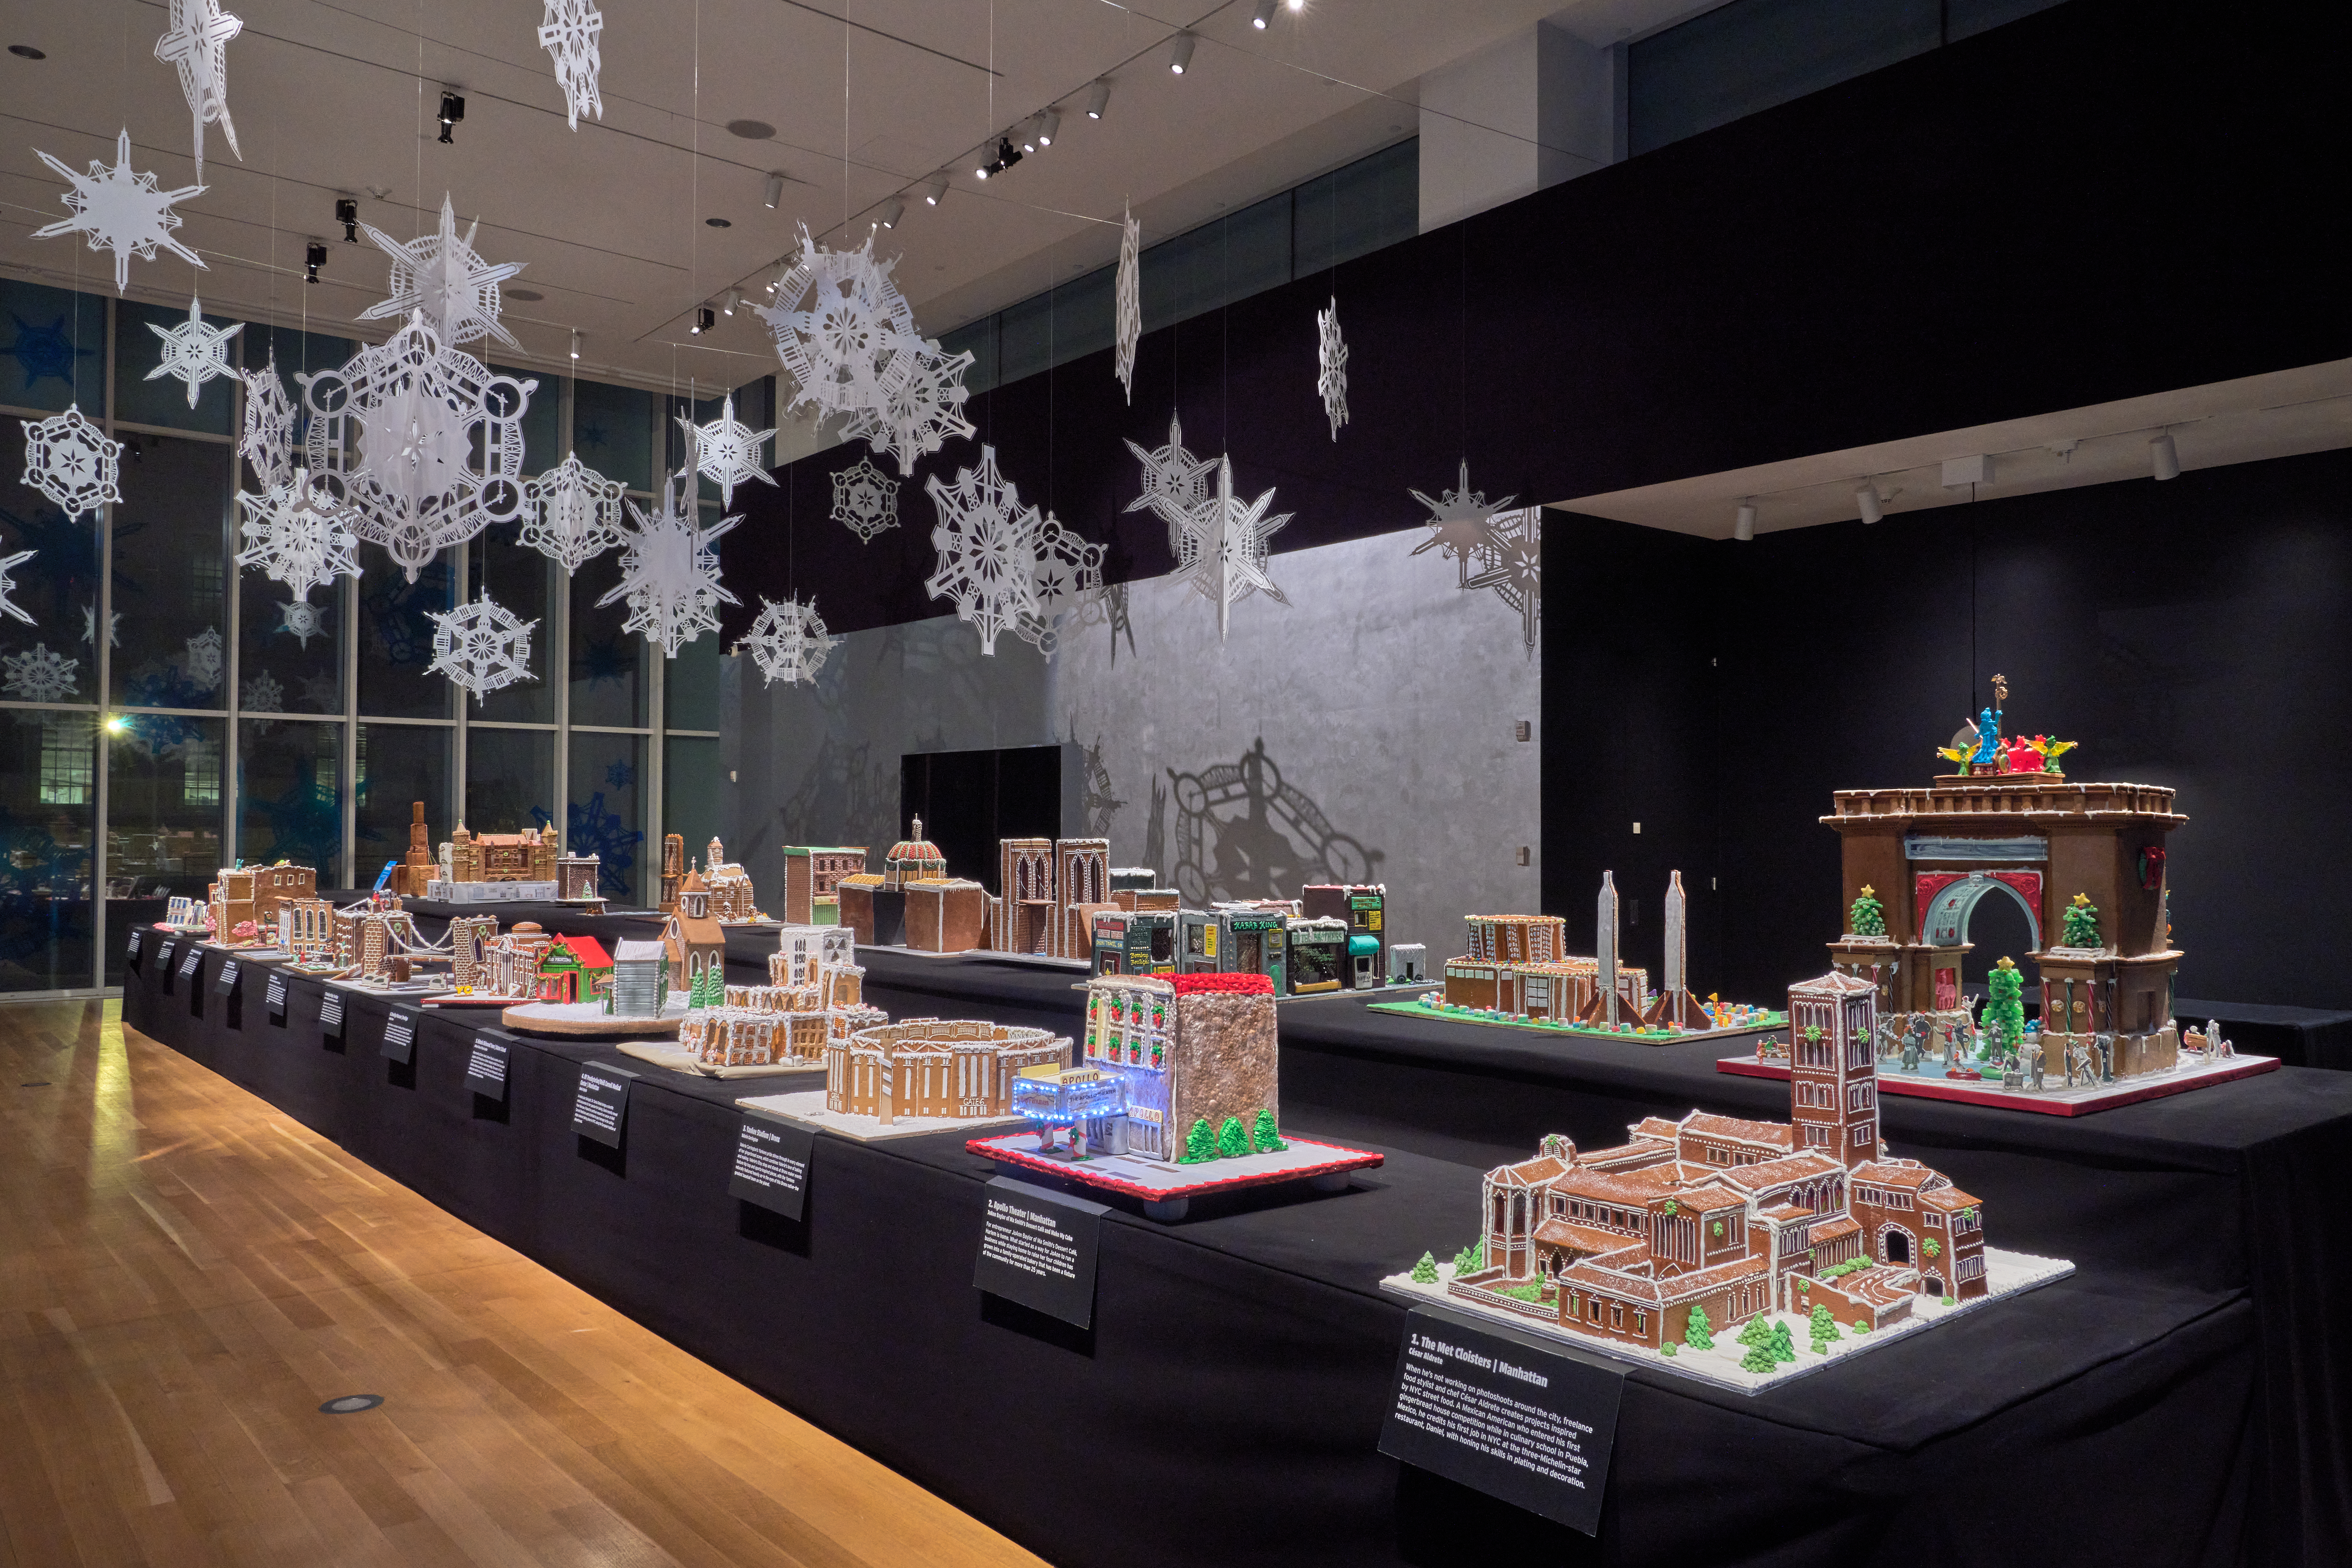 A gallery displaying gingerbread houses.